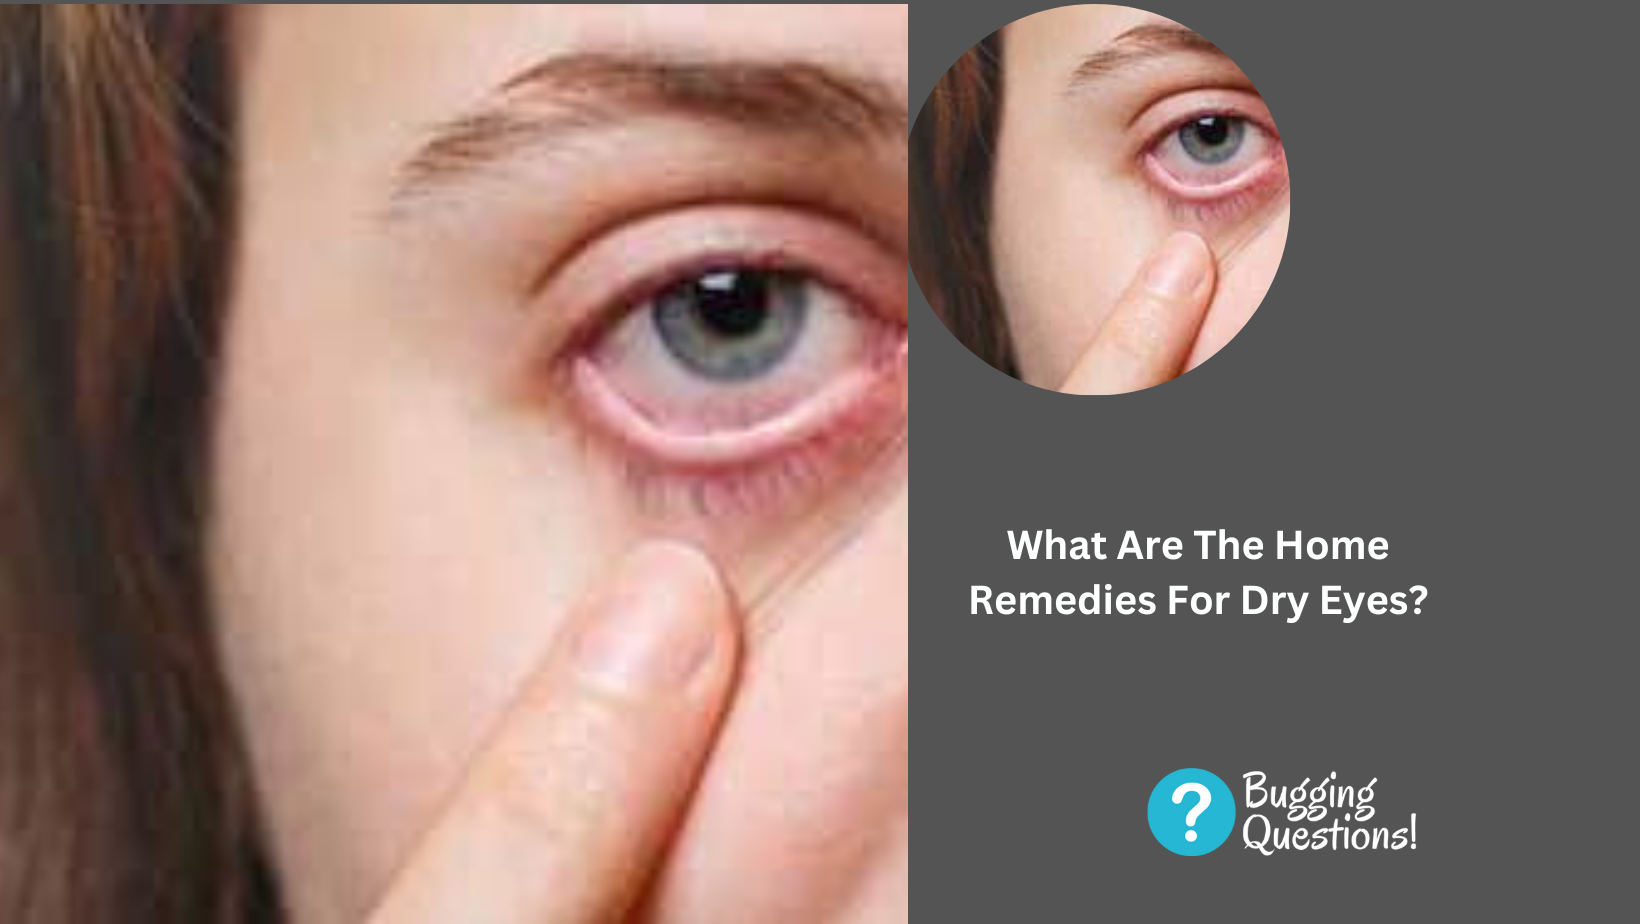 What Are The Home Remedies For Dry Eyes?